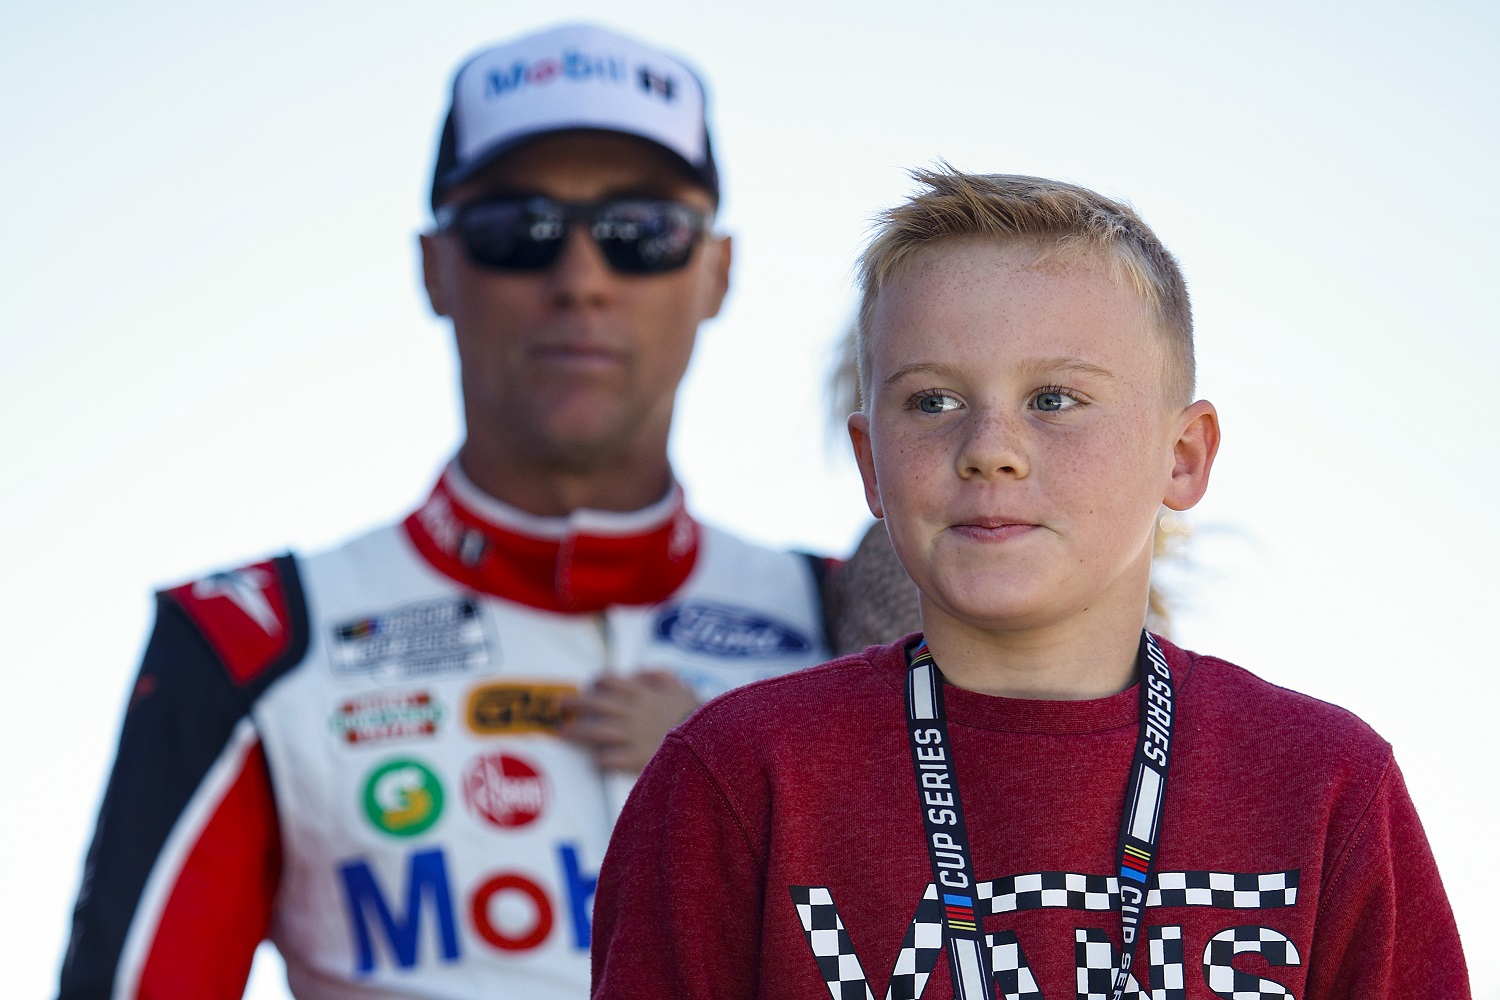 Kevin Harvick and Son Keelan Have Made Racing Demands on Each Other